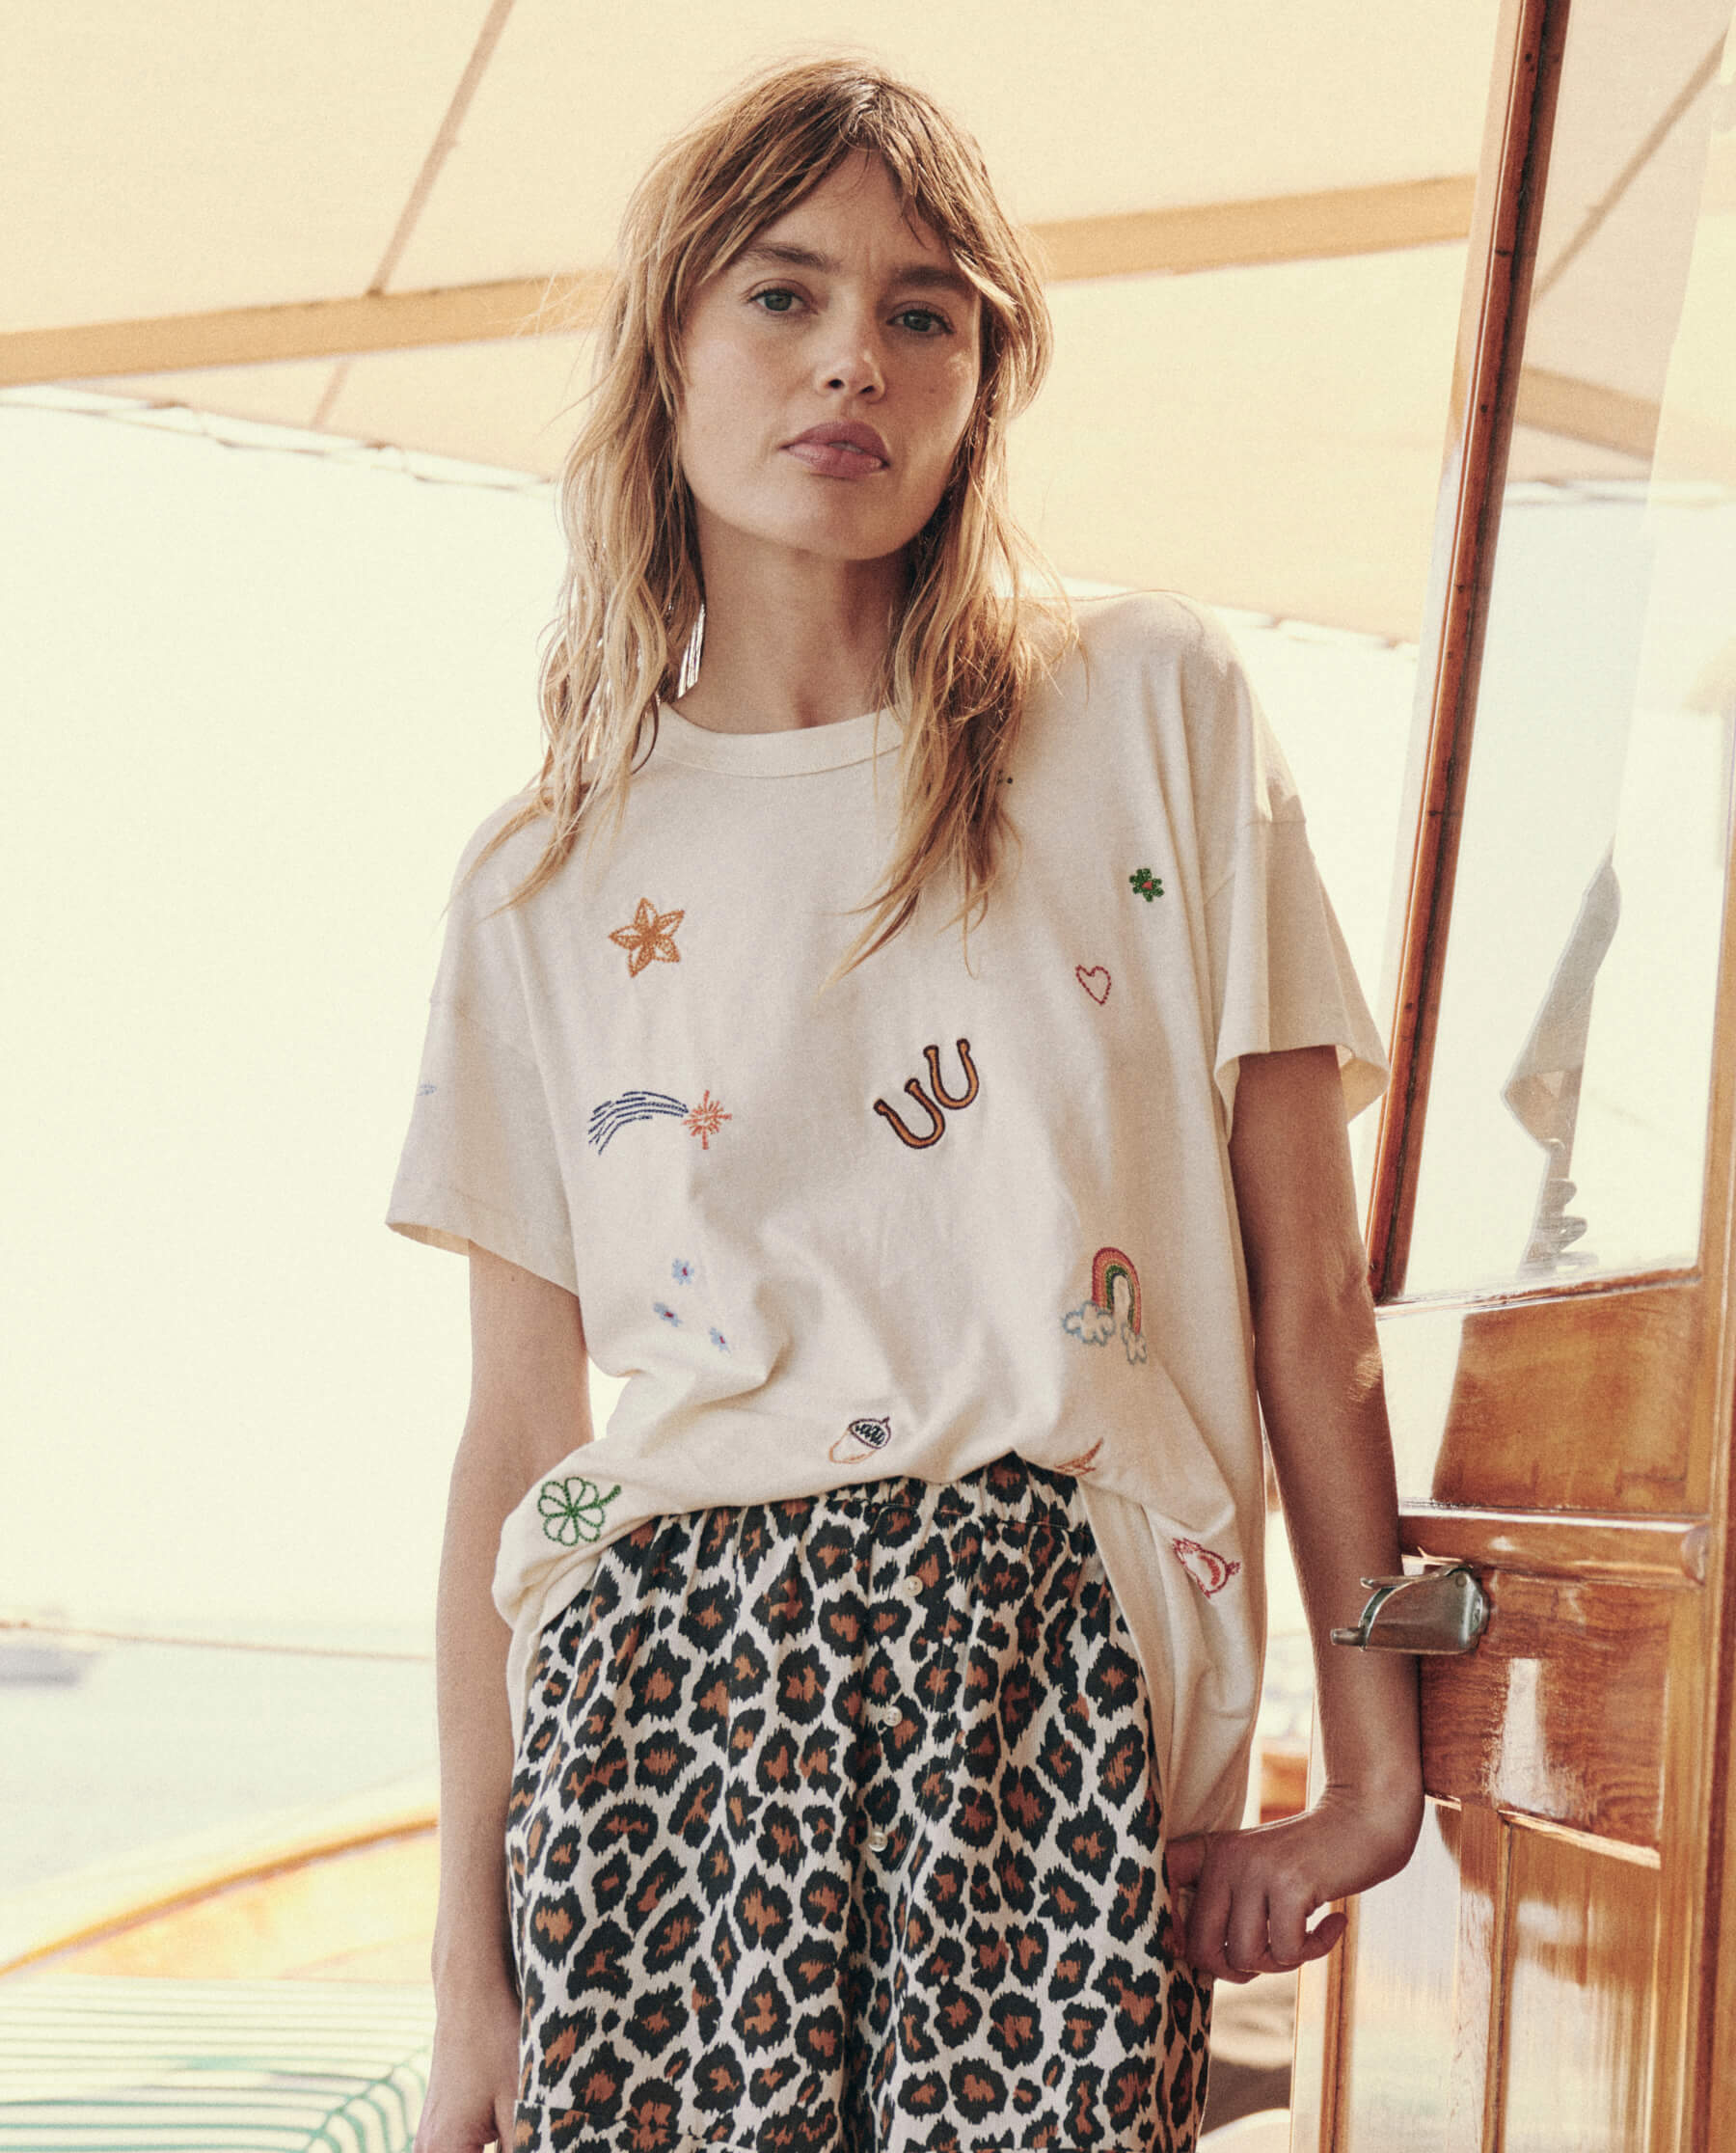 The Boxy Crew. Embroidered -- Washed White with Charm Embroidery